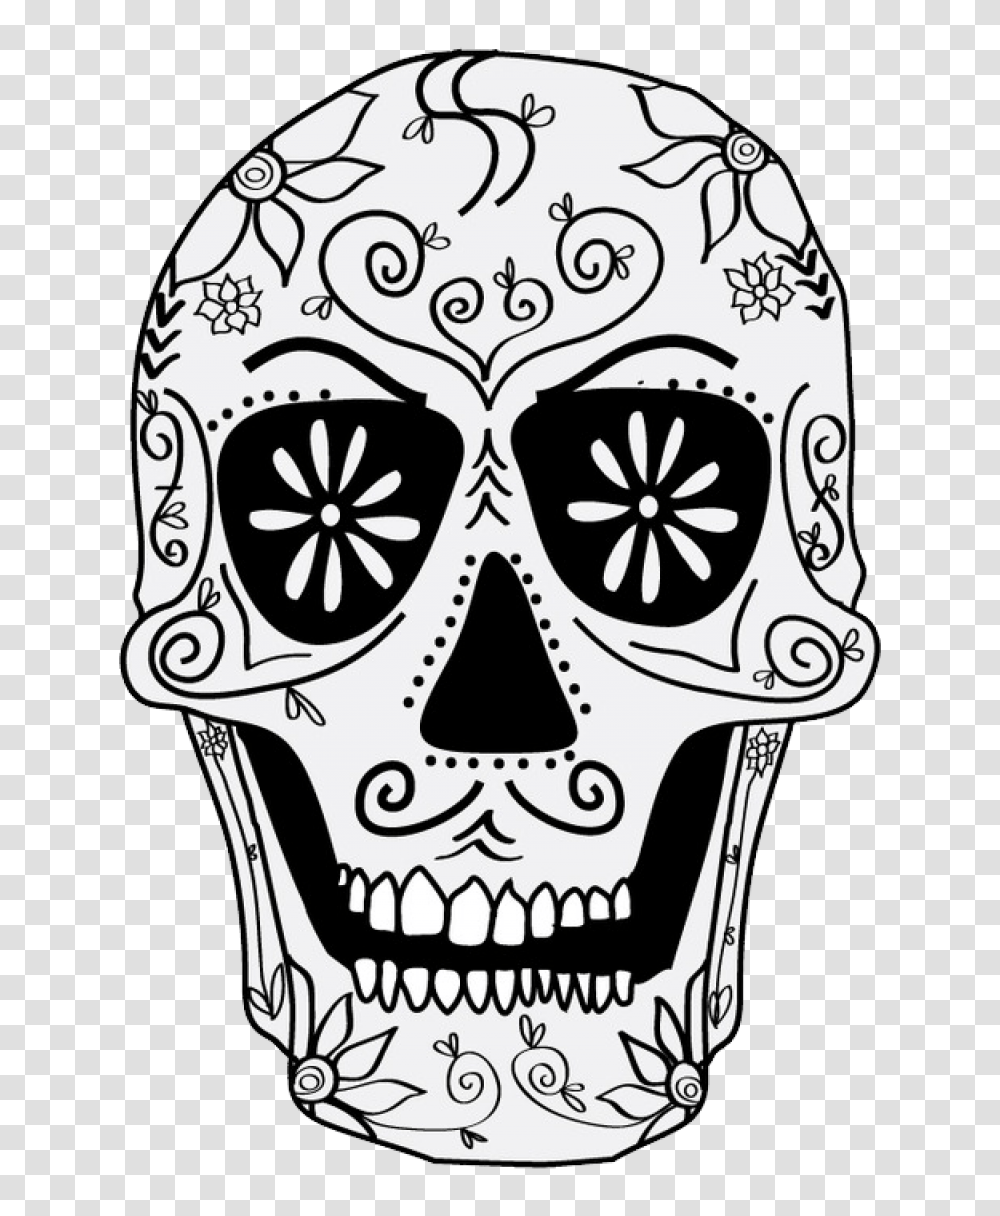 Download Skulls Image For Free Day Of The Dead Skull, Doodle, Drawing, Art, Stencil Transparent Png